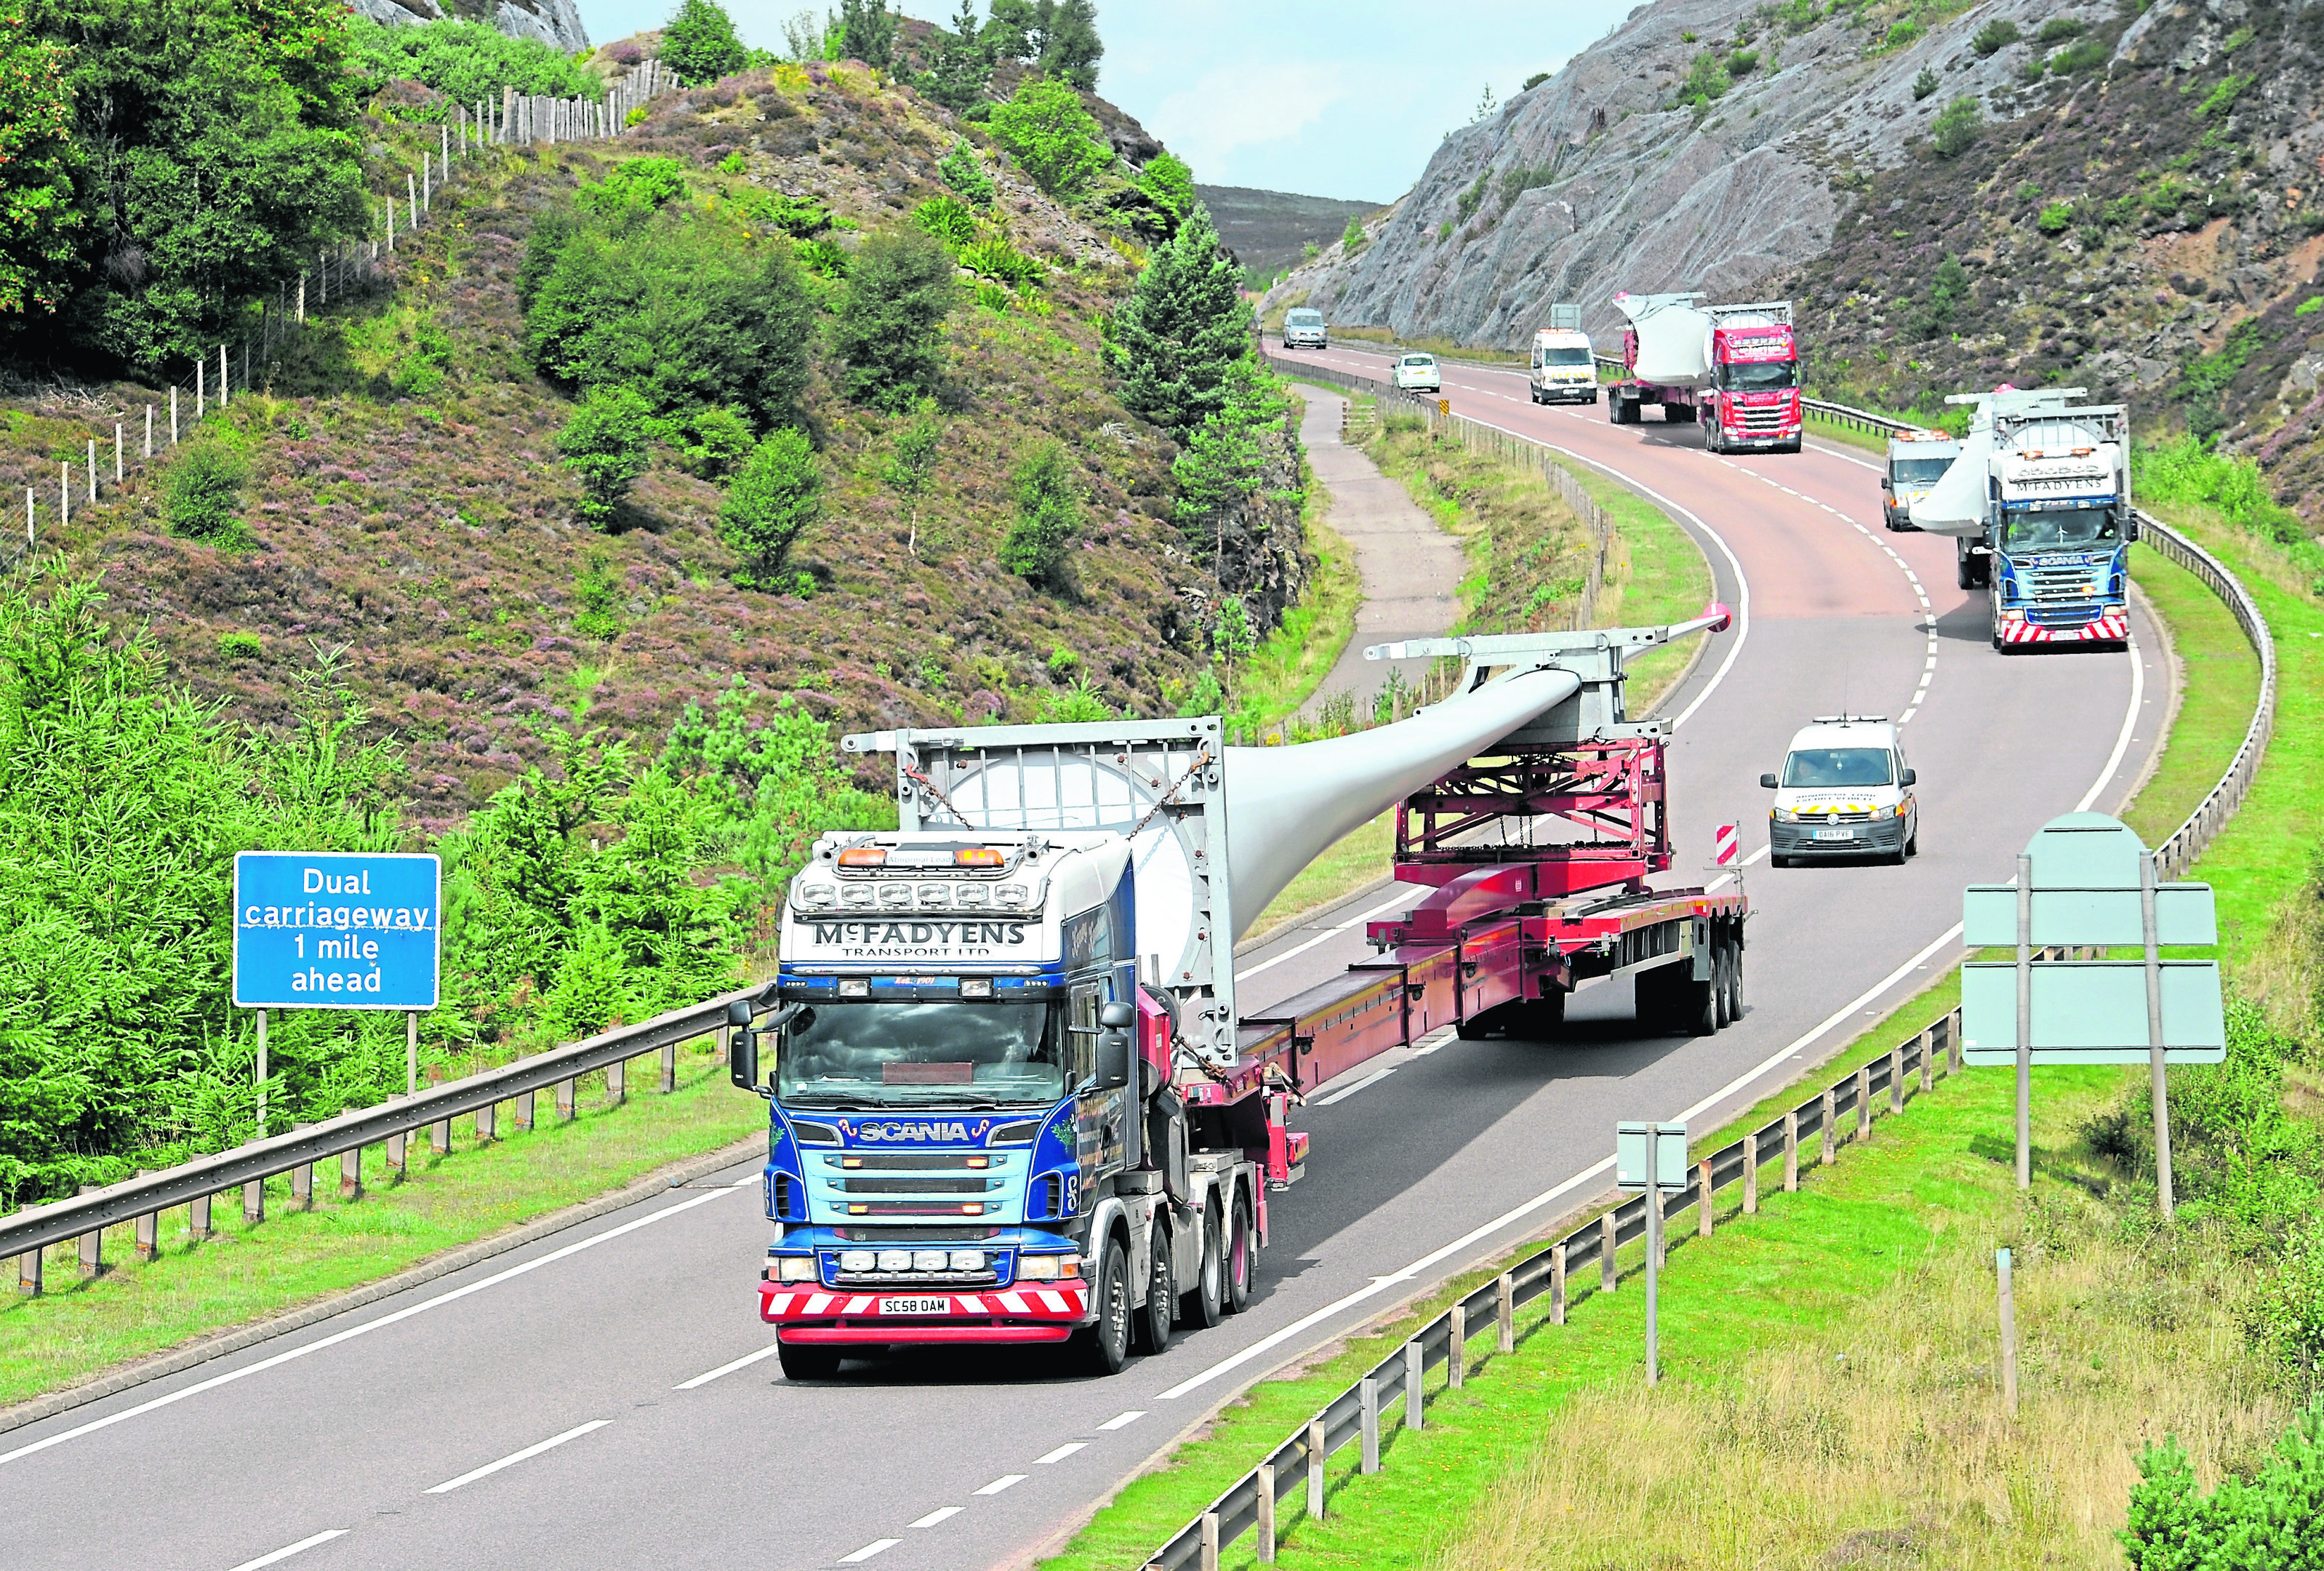 The first of many wind farm convoys made its way from Inverness down the A9 to Aviemore before turning north again for the Tom Nan Clach Wind Farm on Dava.